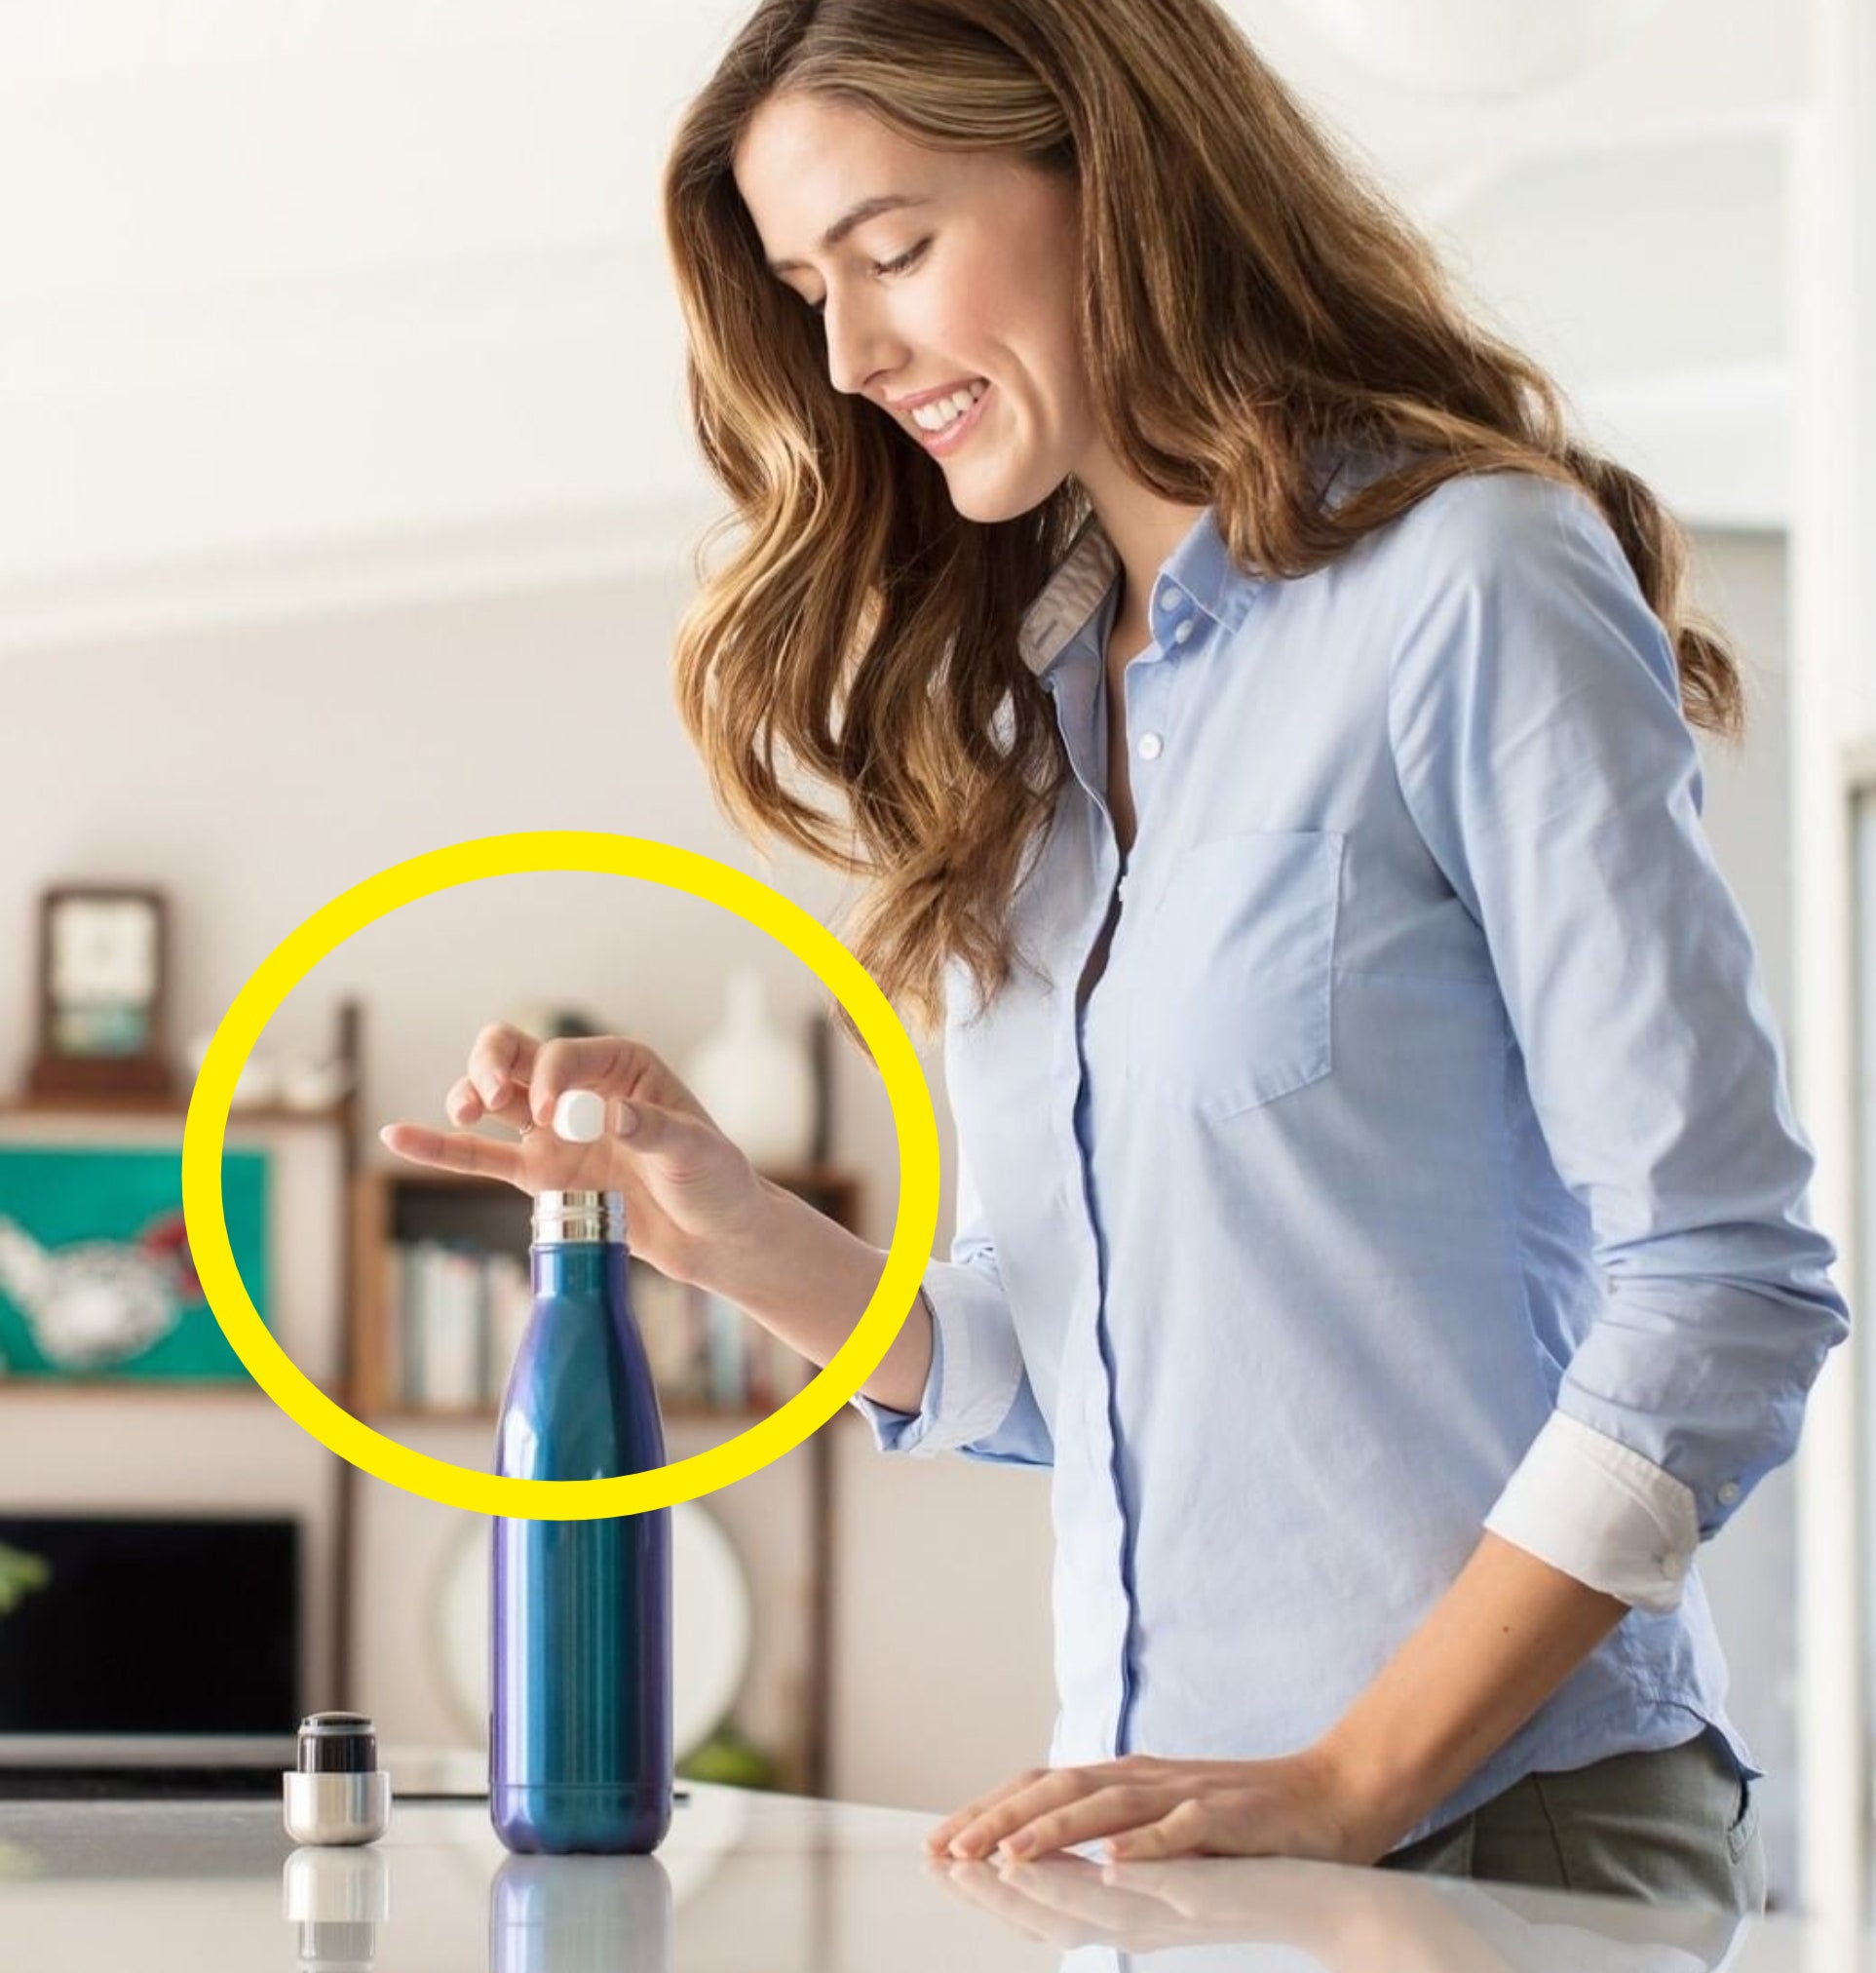 A person dropping the tablet into a water bottle